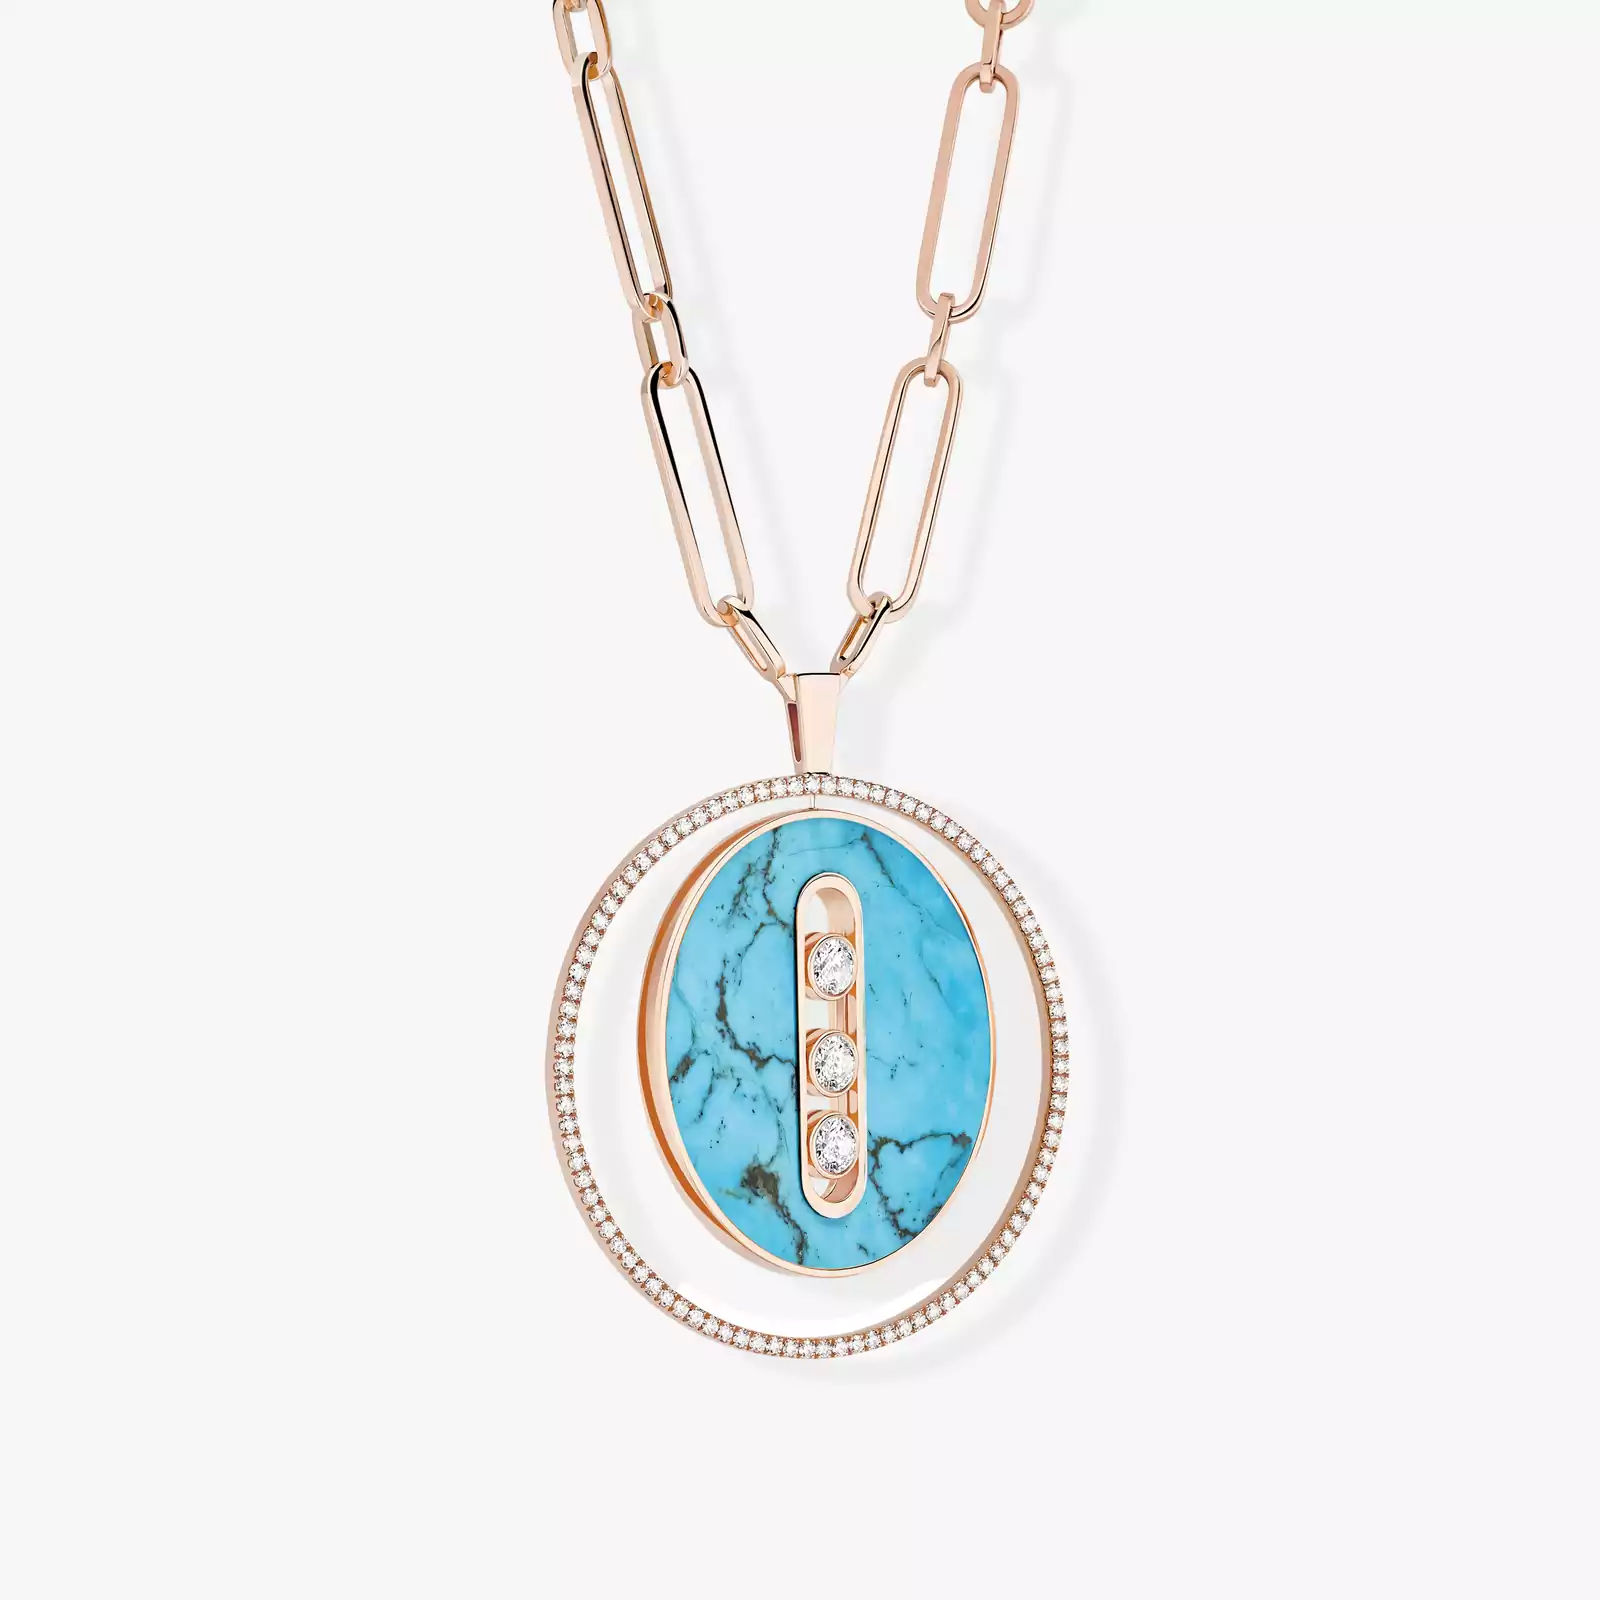 Turquoise Lucky Move Long Necklace LM Pink Gold For Her Diamond Necklace 11720-PG